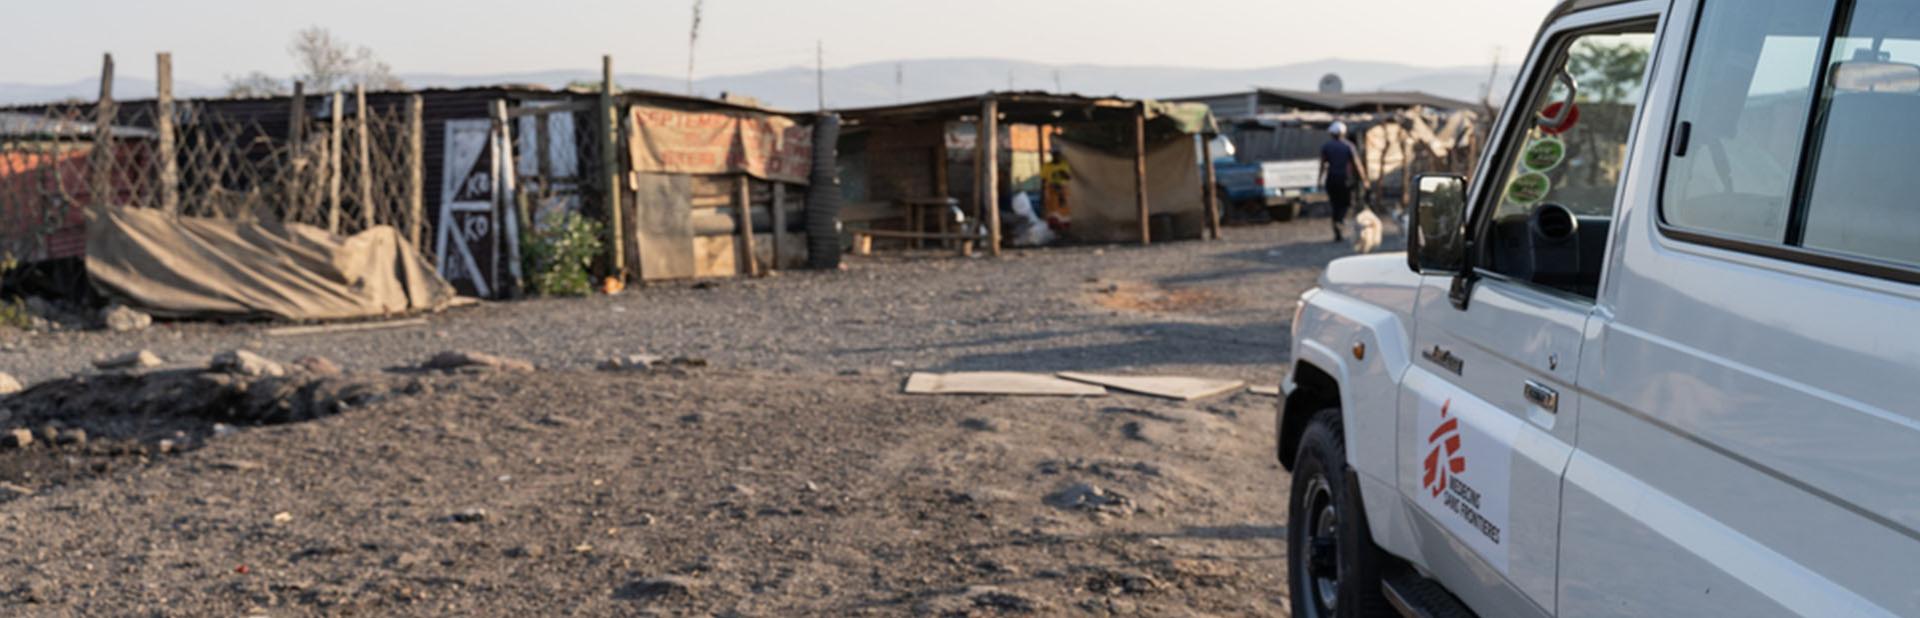 MSF, Doctors Without Borders, South Africa, Rustenburg